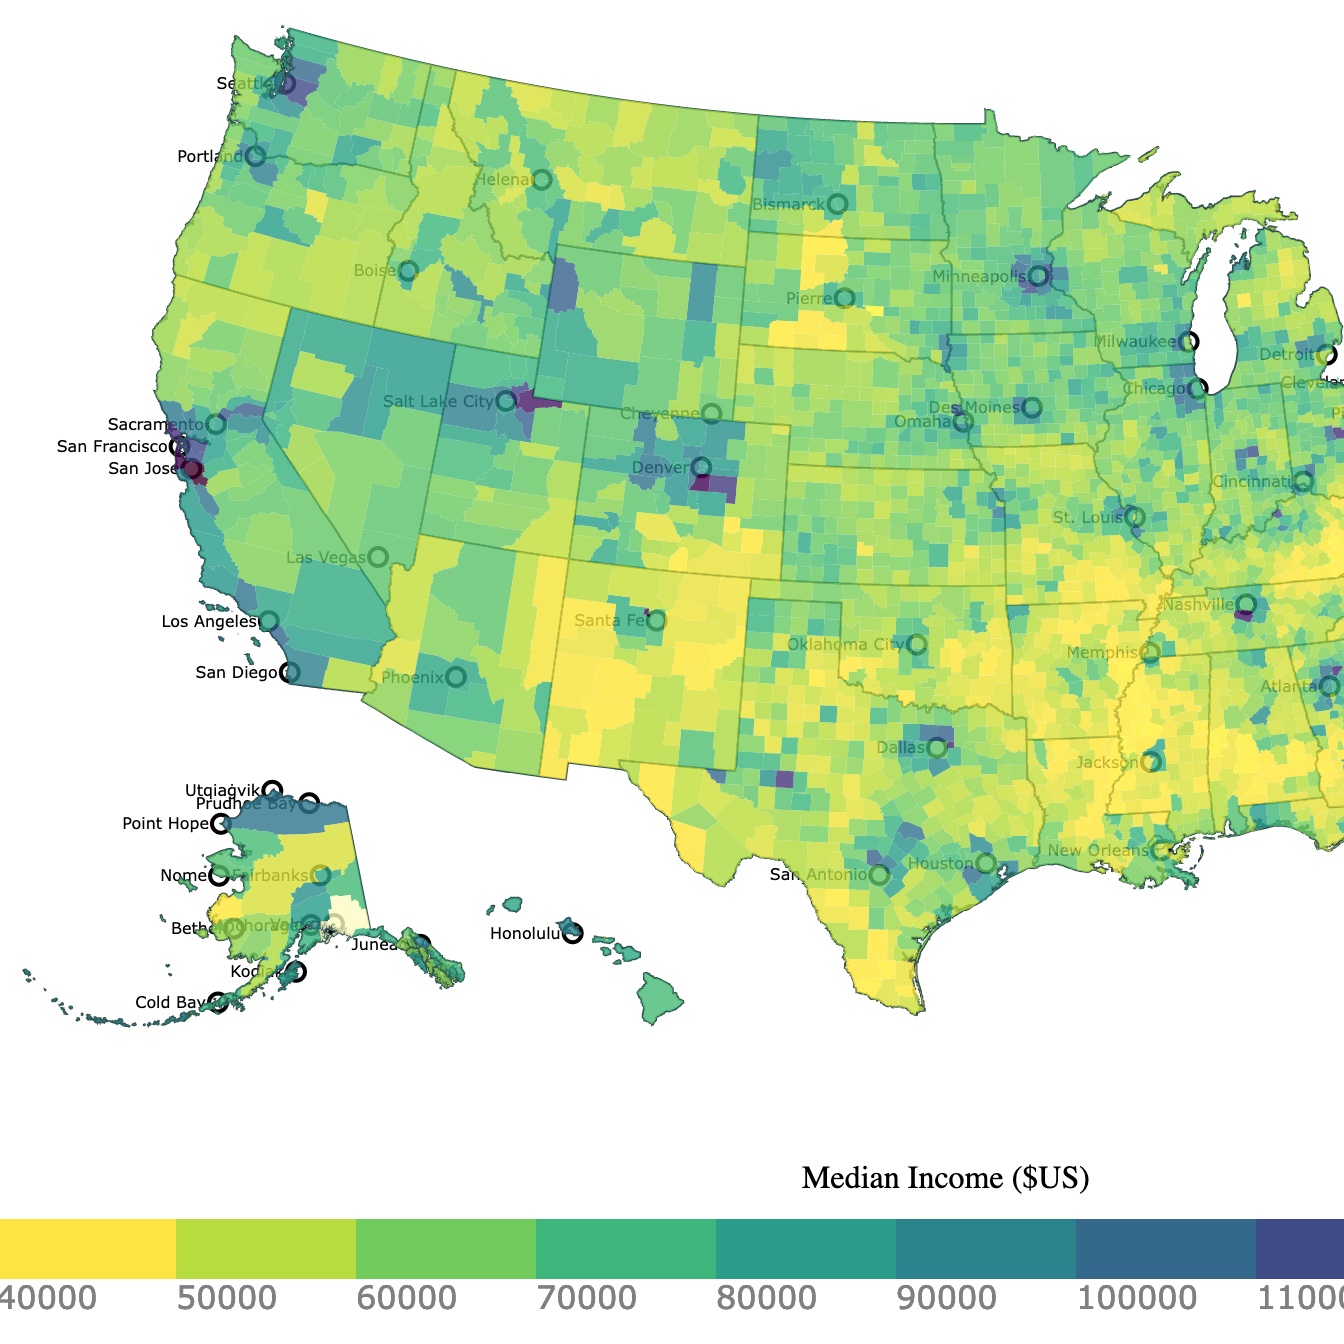 Map of U.S. Median Income